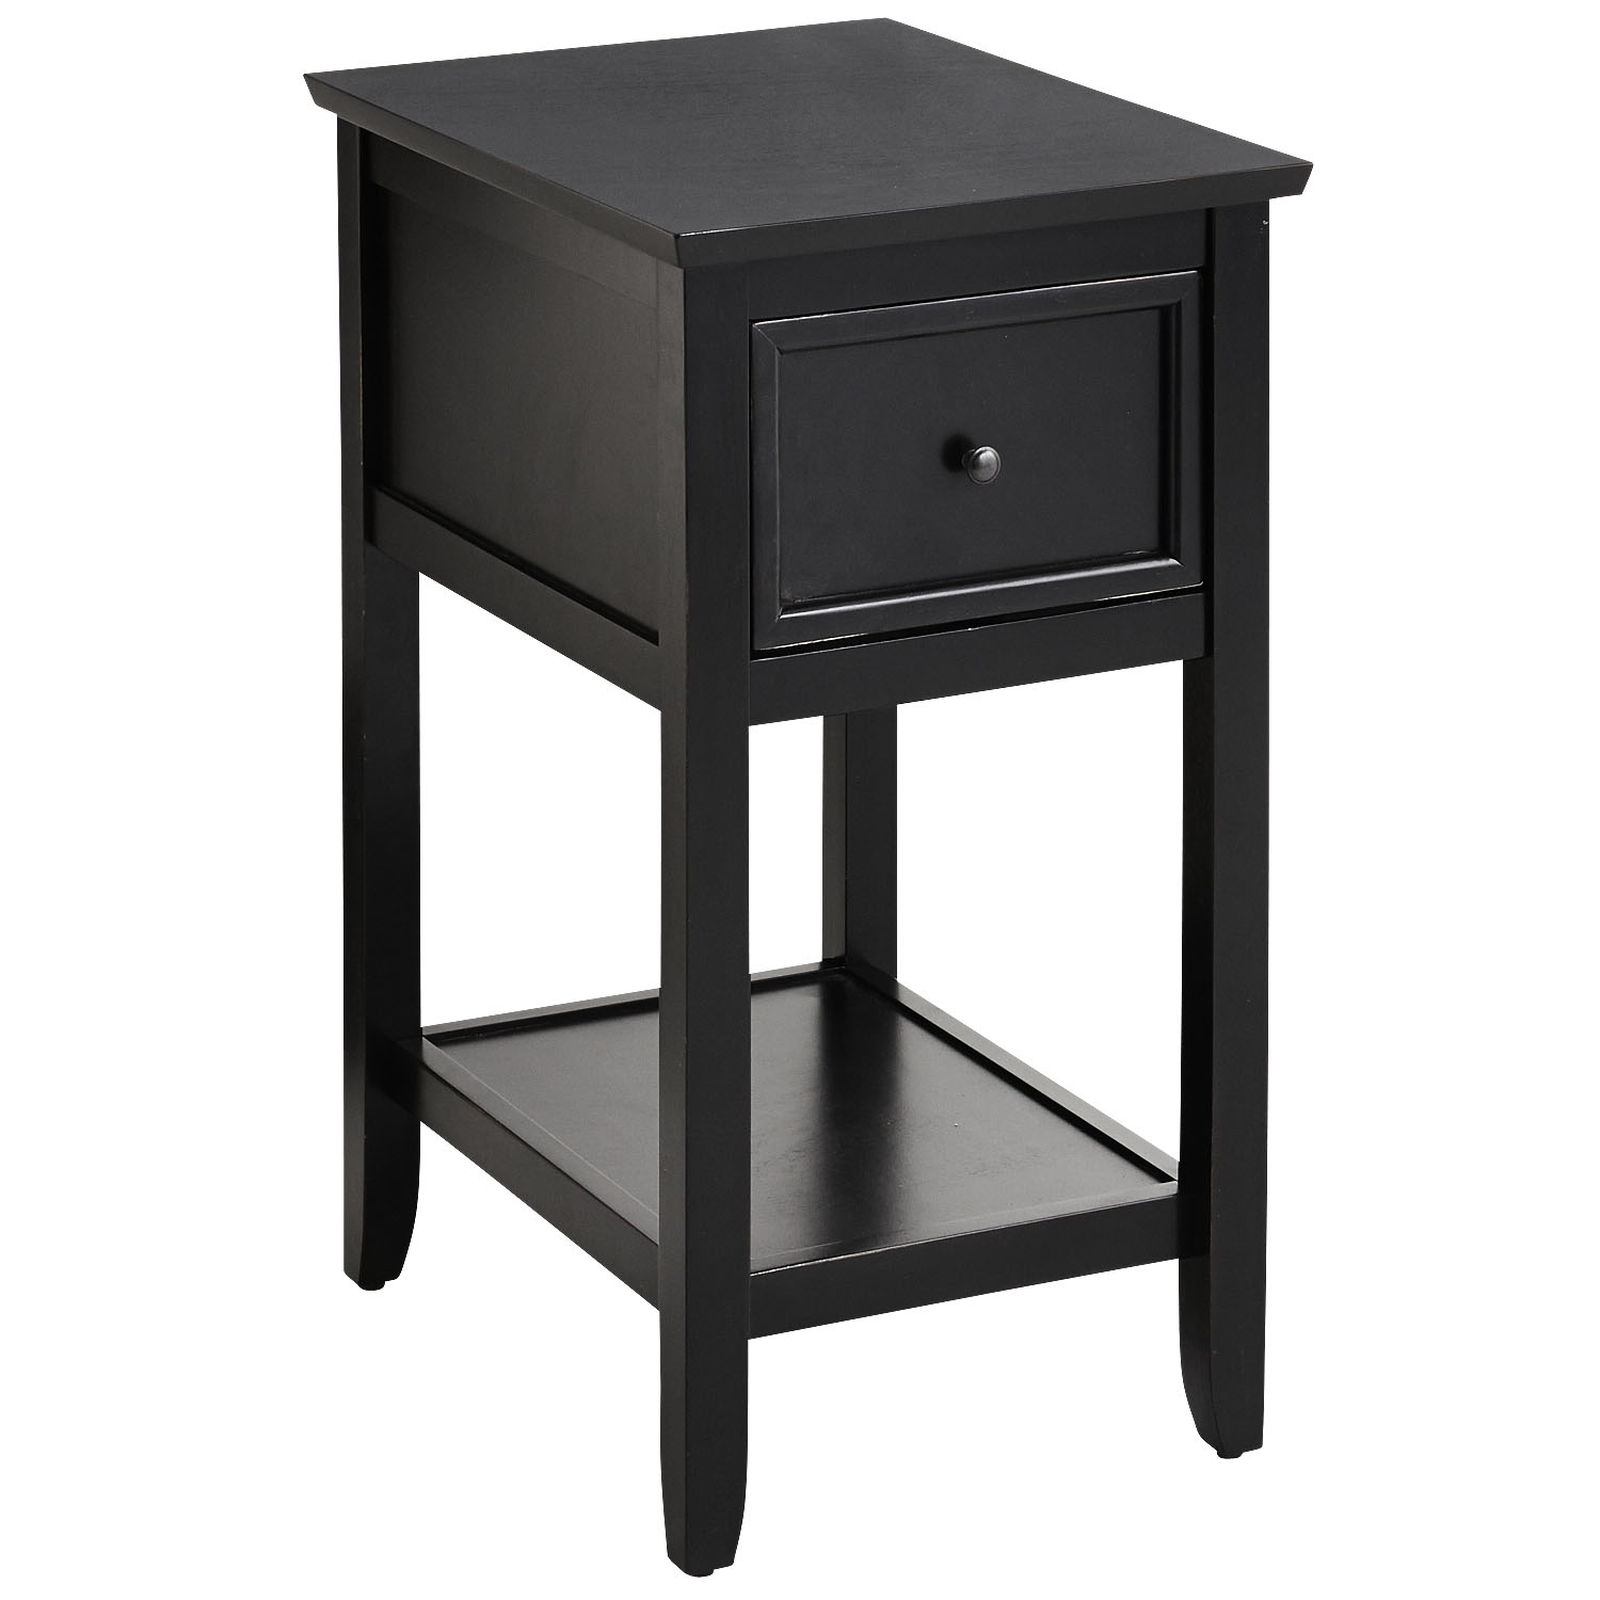 the fantastic real extra small end tables jockboymusic square coffee with storage rustic table home ashington rubbed black pier imports white drawers sightly accent unique round